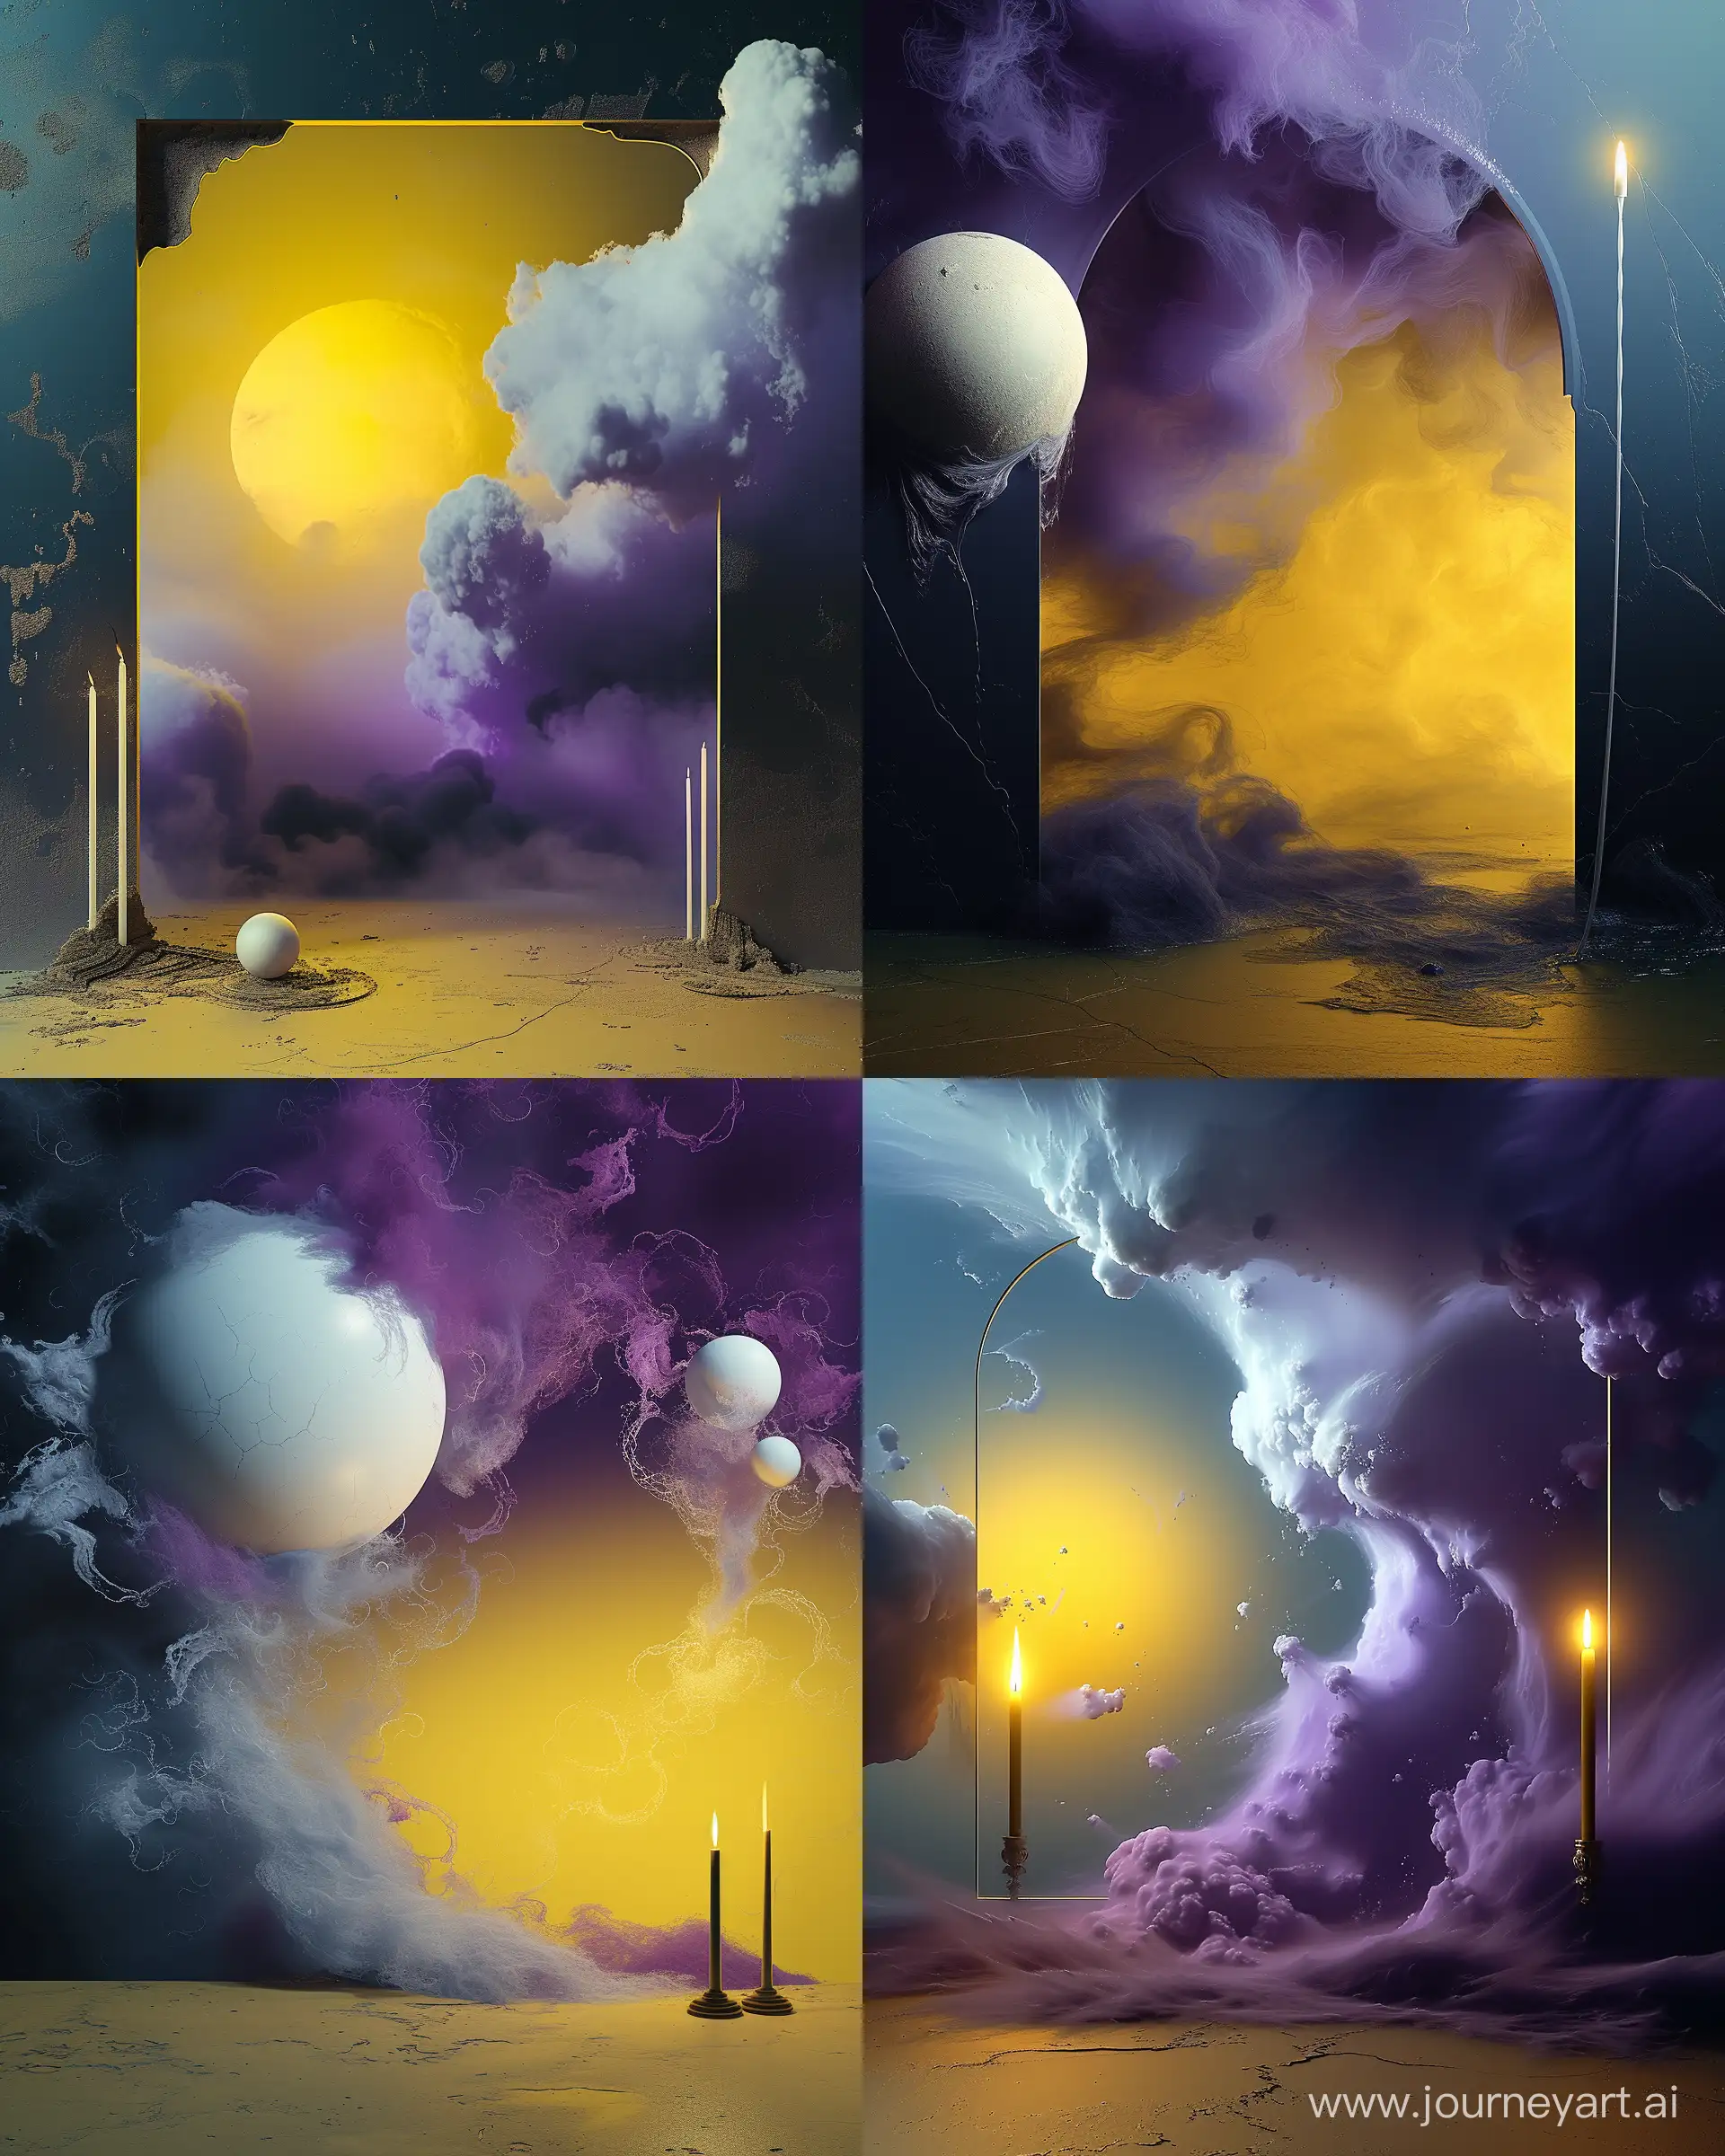 https://i.postimg.cc/wBWtMXzw/sdgery346-Abstract-and-poetic-sculpture-environment-art-in-a-r-e188aa8d-fc19-4253-abf3-e9e039fb9bb7.png, abstract atmosphere with yellow and purple
, magical, surrealism --ar 4:5